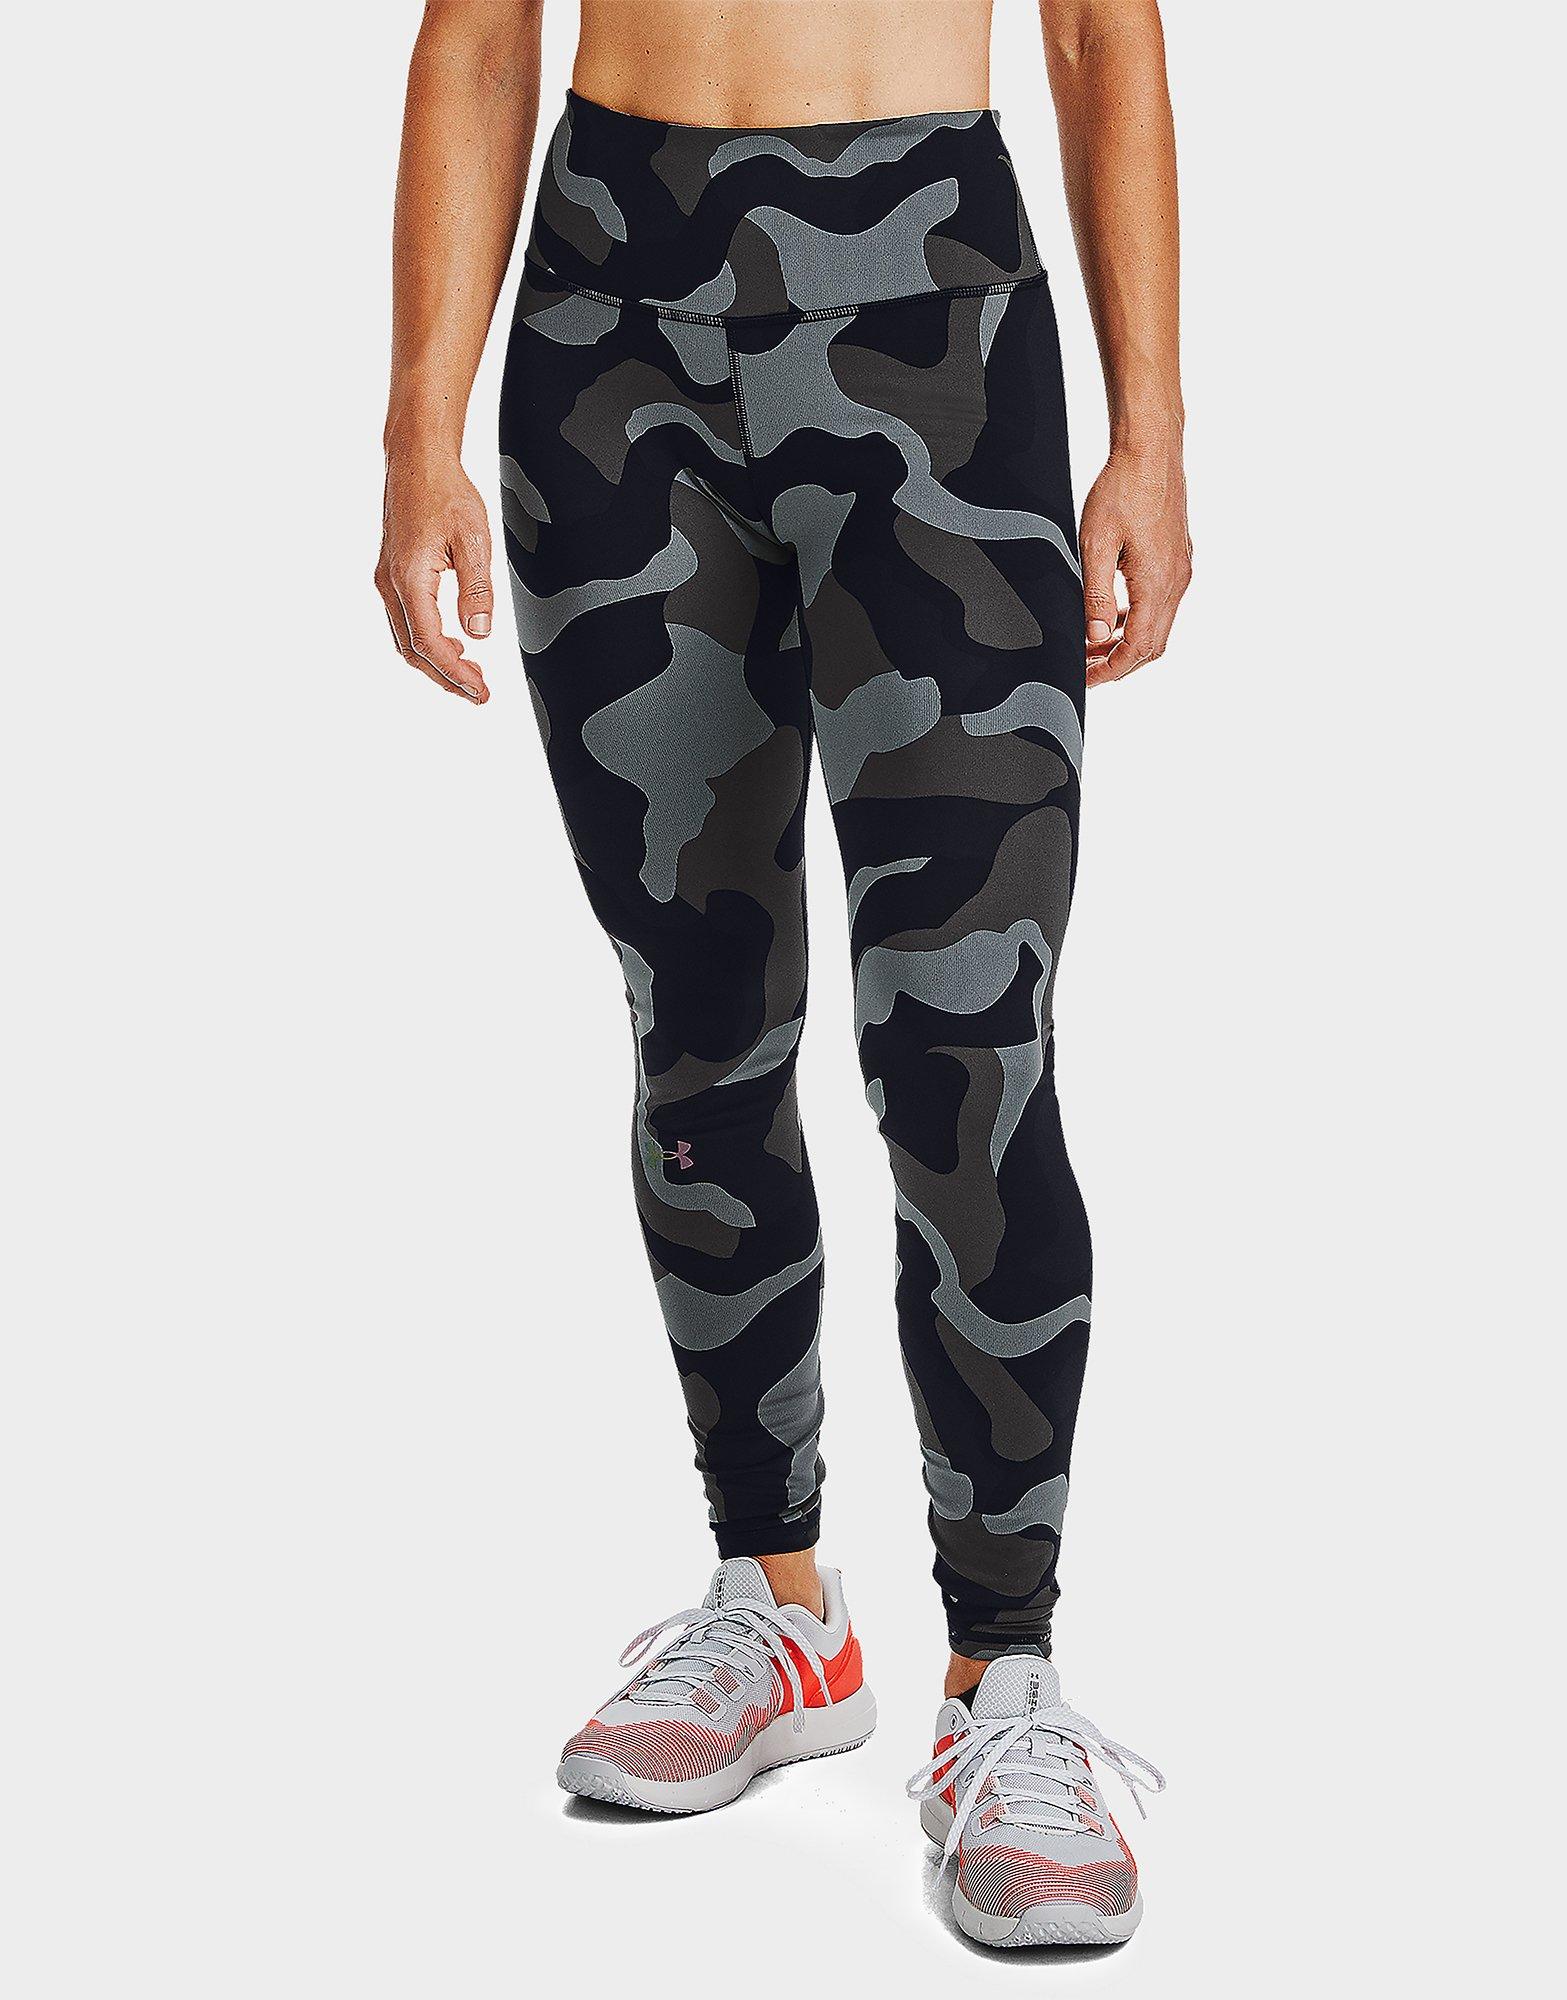 Under Armour Rush Camo Tights | JD Sports